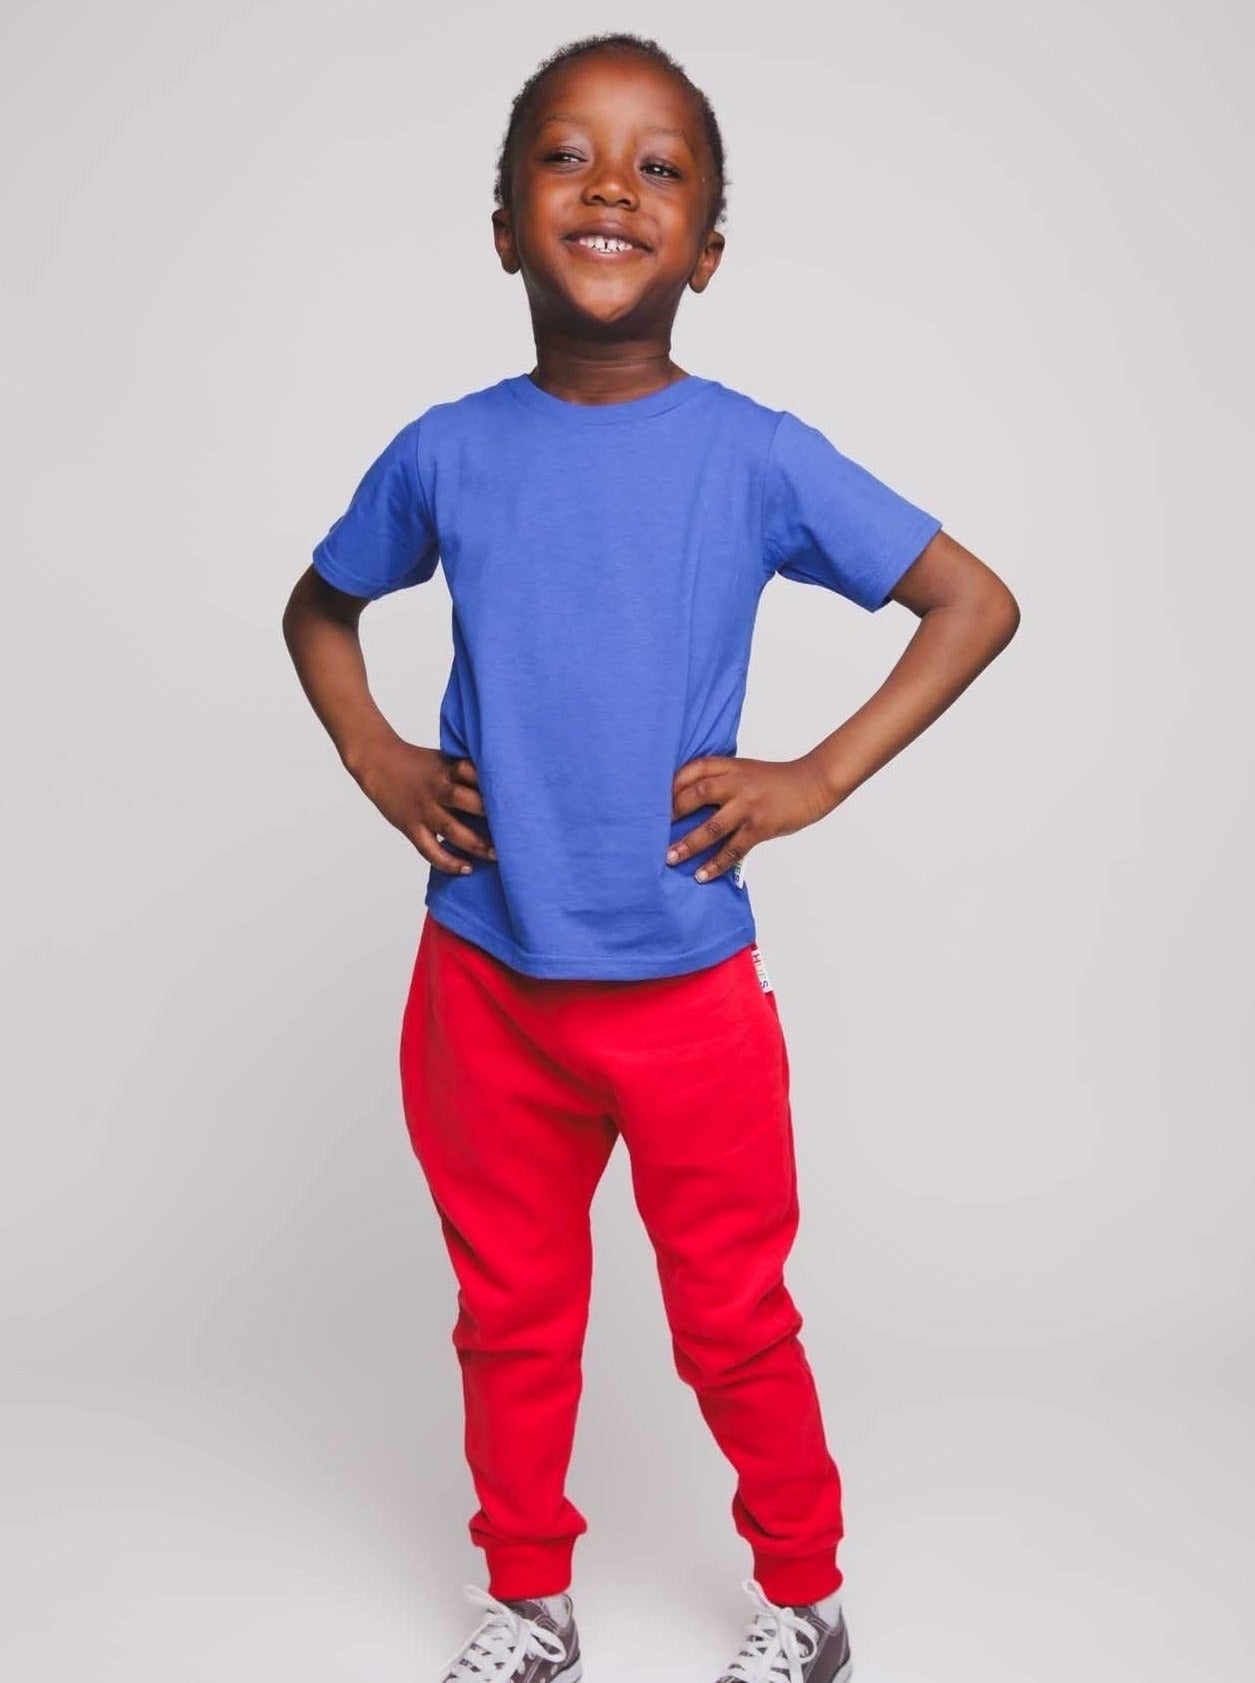 A boy wearing a blue t-shirt and red trousers - Hues Clothing